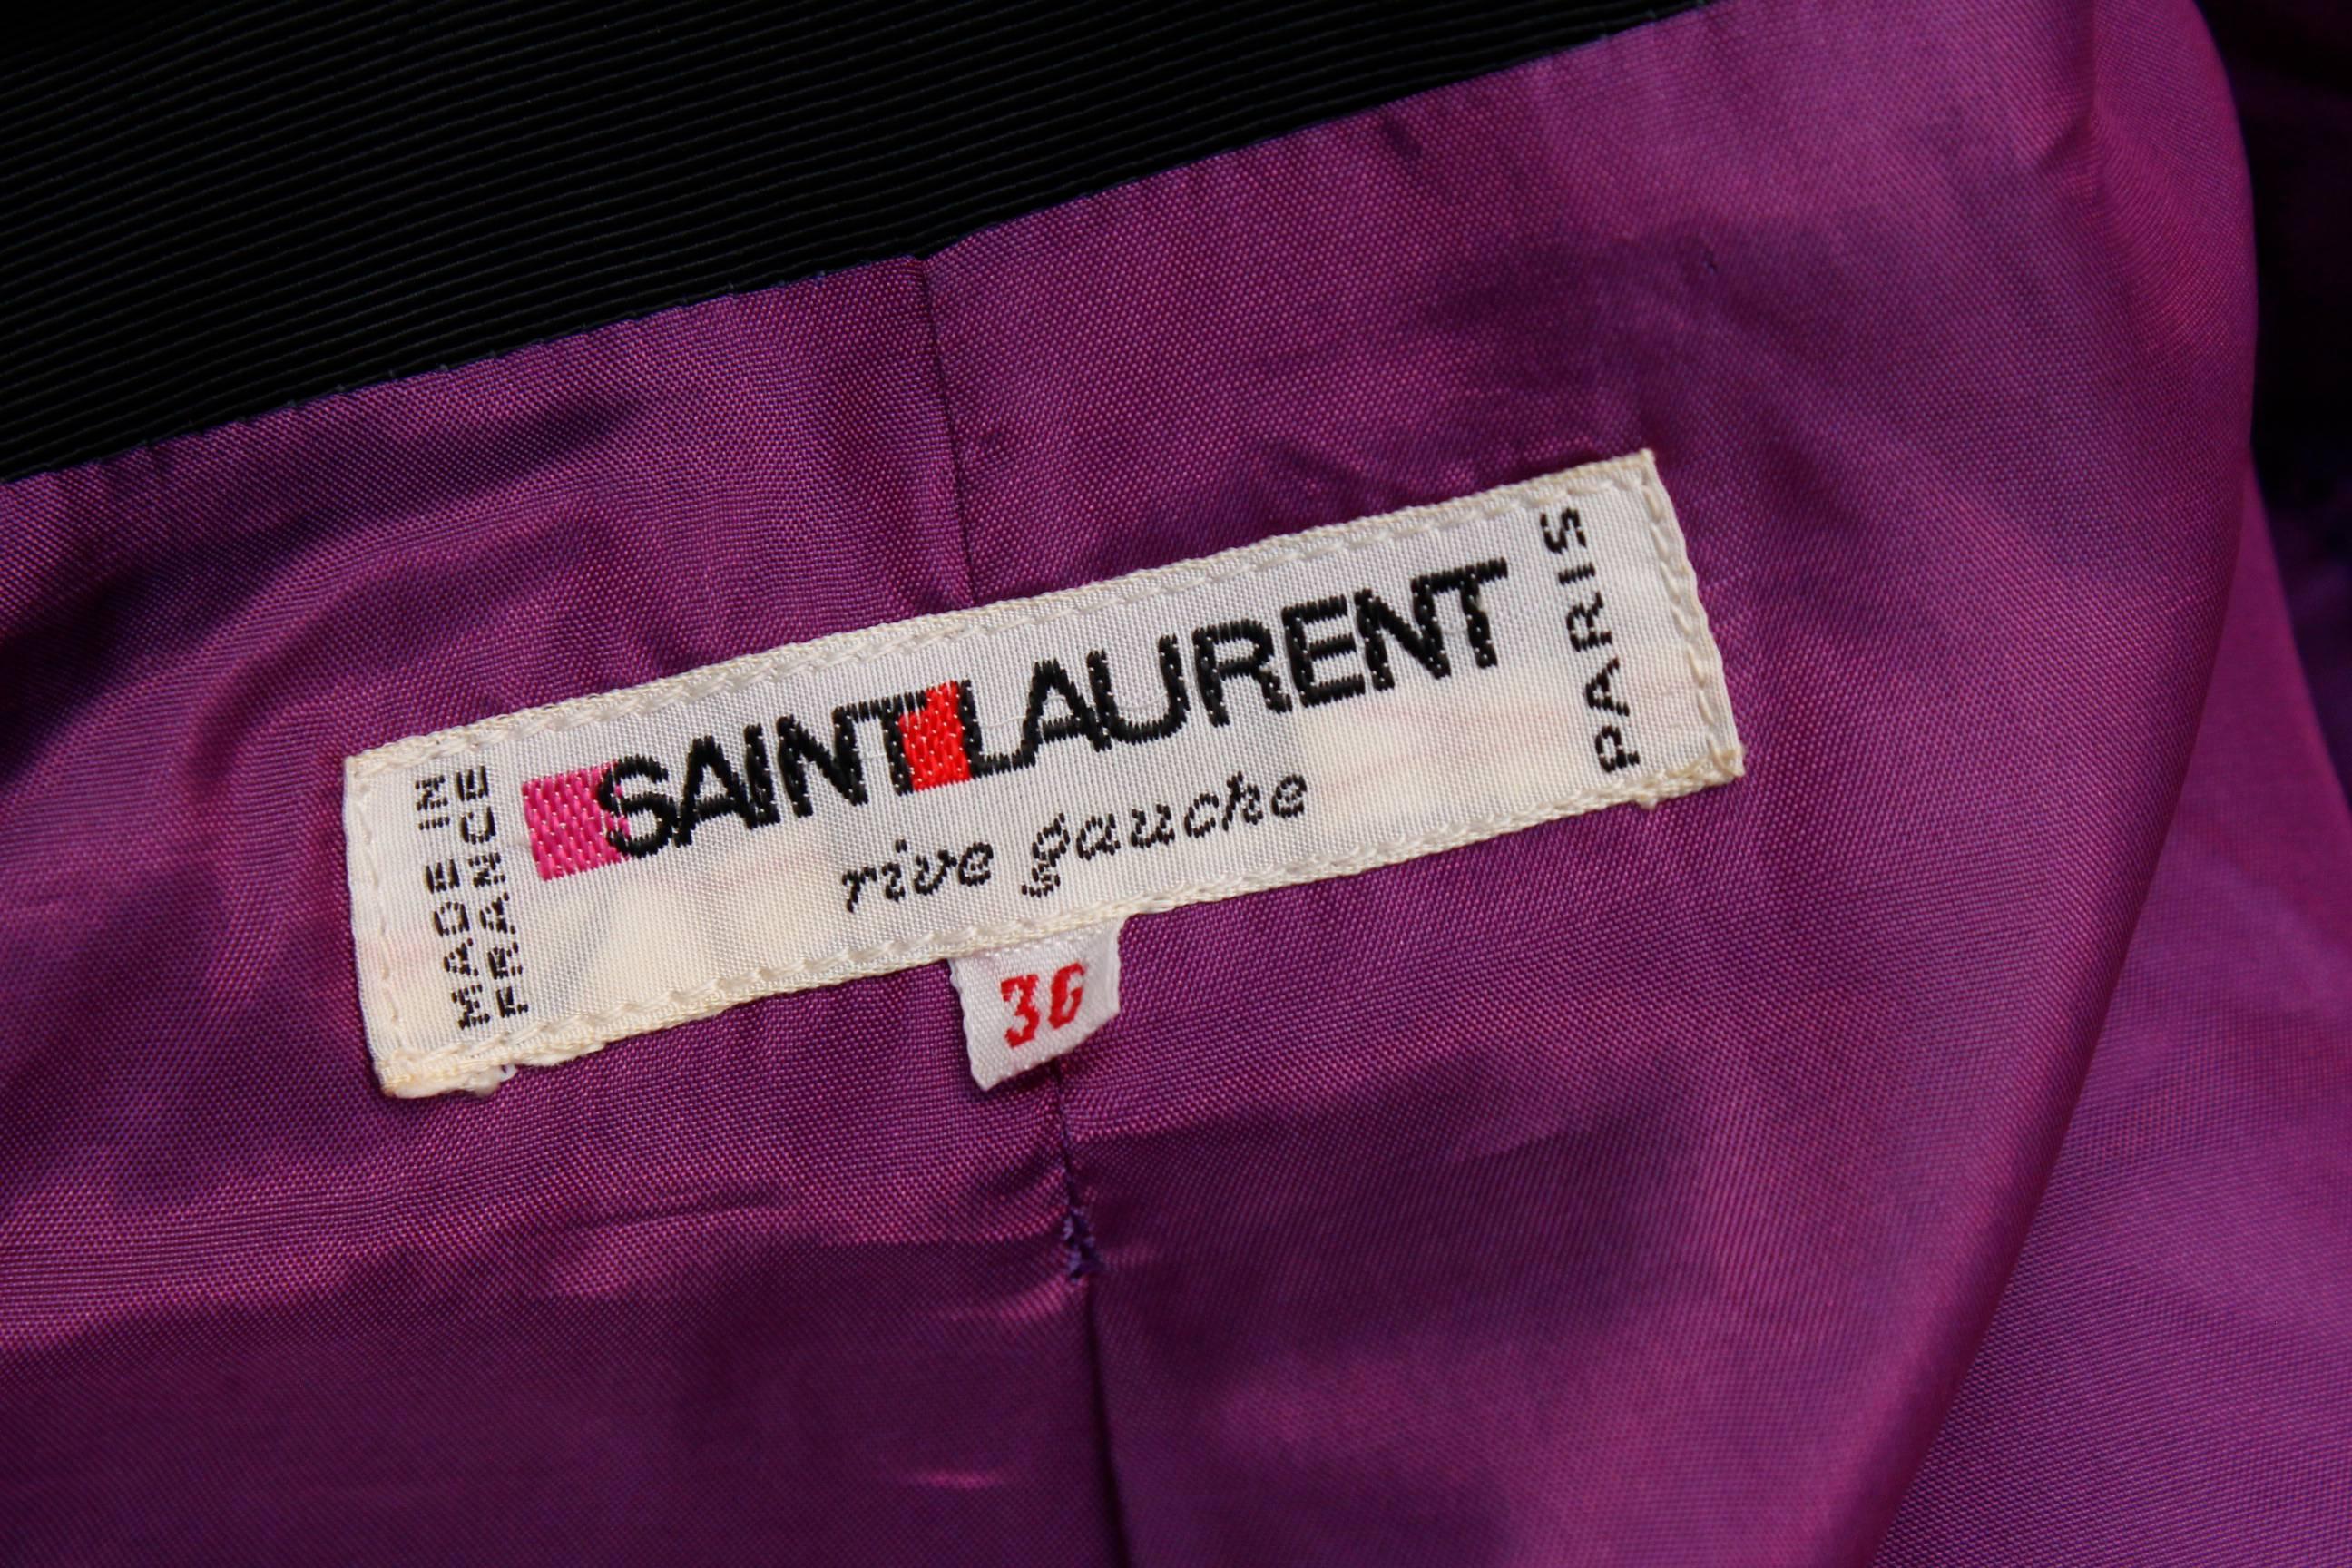 Yves Saint Laurent Rive Gauche dress and jacket set in purple, black and white  For Sale 5